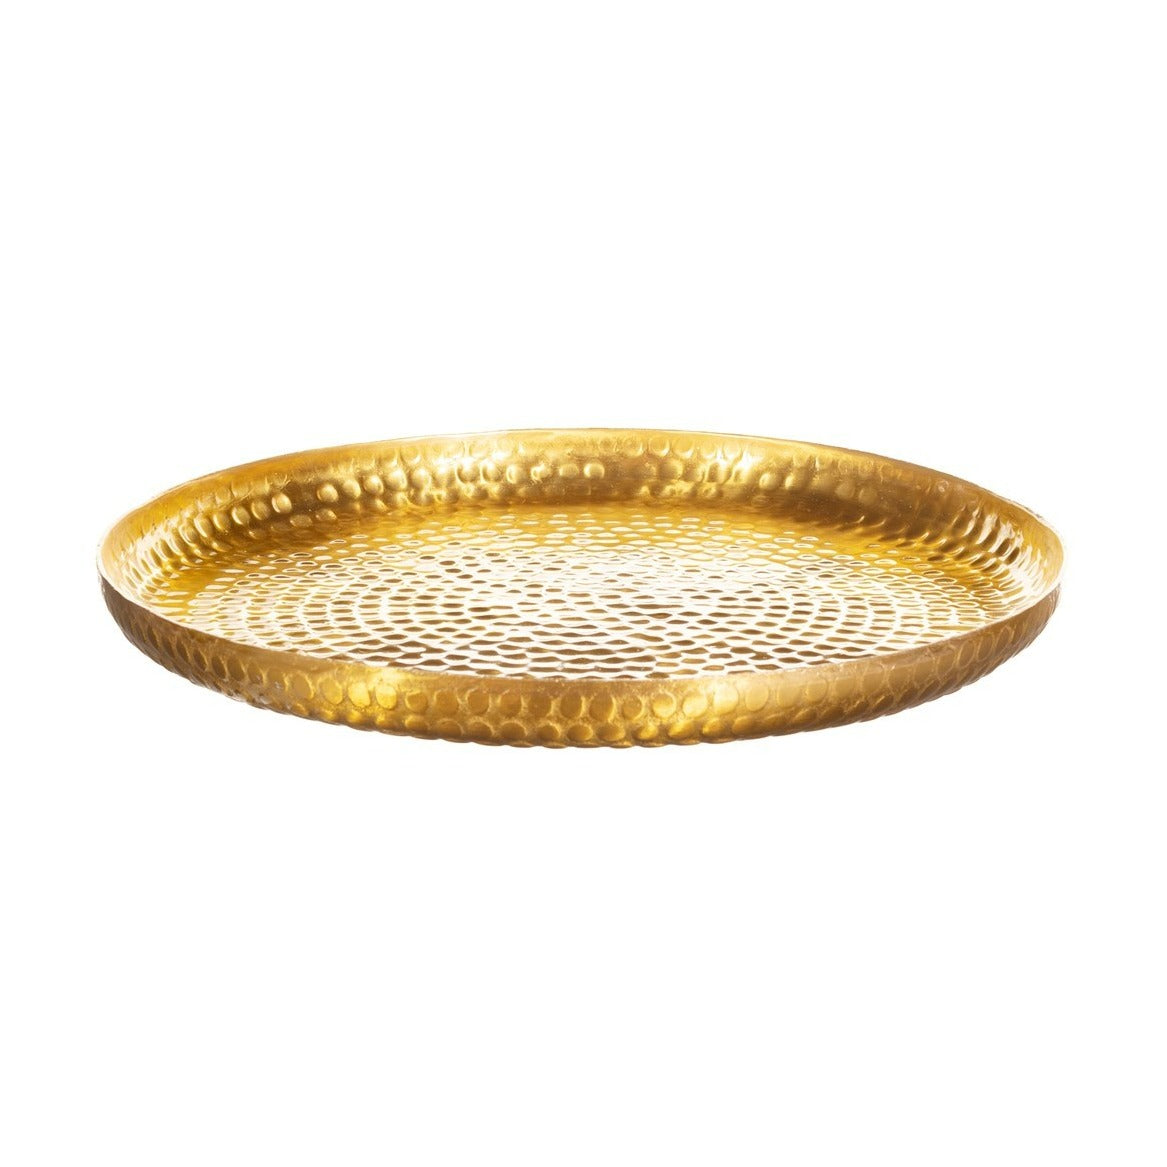 Sass & Belle Gold Hammered Metal Tray